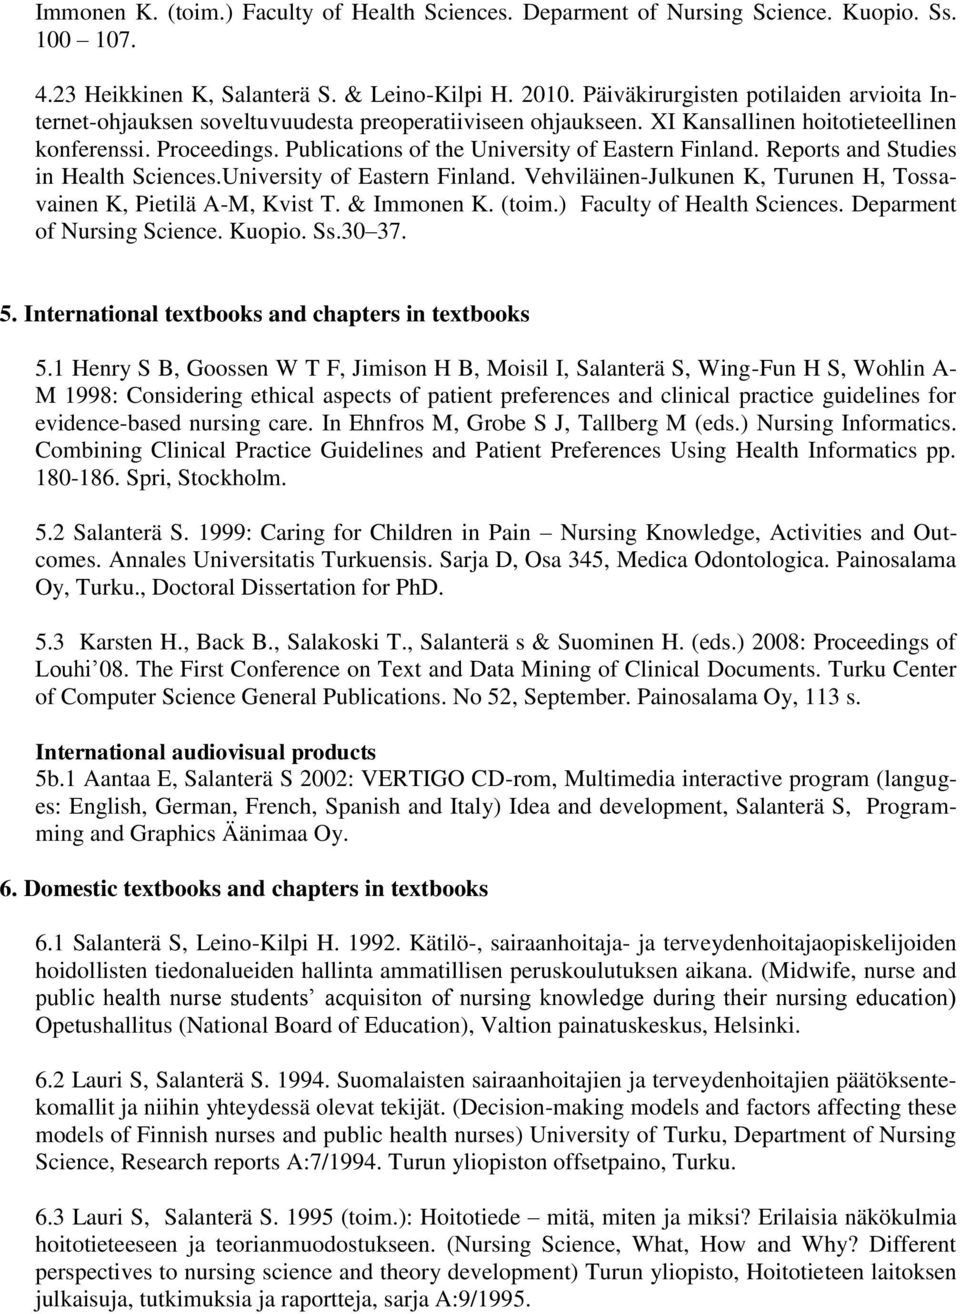 Publications of the University of Eastern Finland. Reports and Studies in Health Sciences.University of Eastern Finland. Vehviläinen-Julkunen K, Turunen H, Tossavainen K, Pietilä A-M, Kvist T.